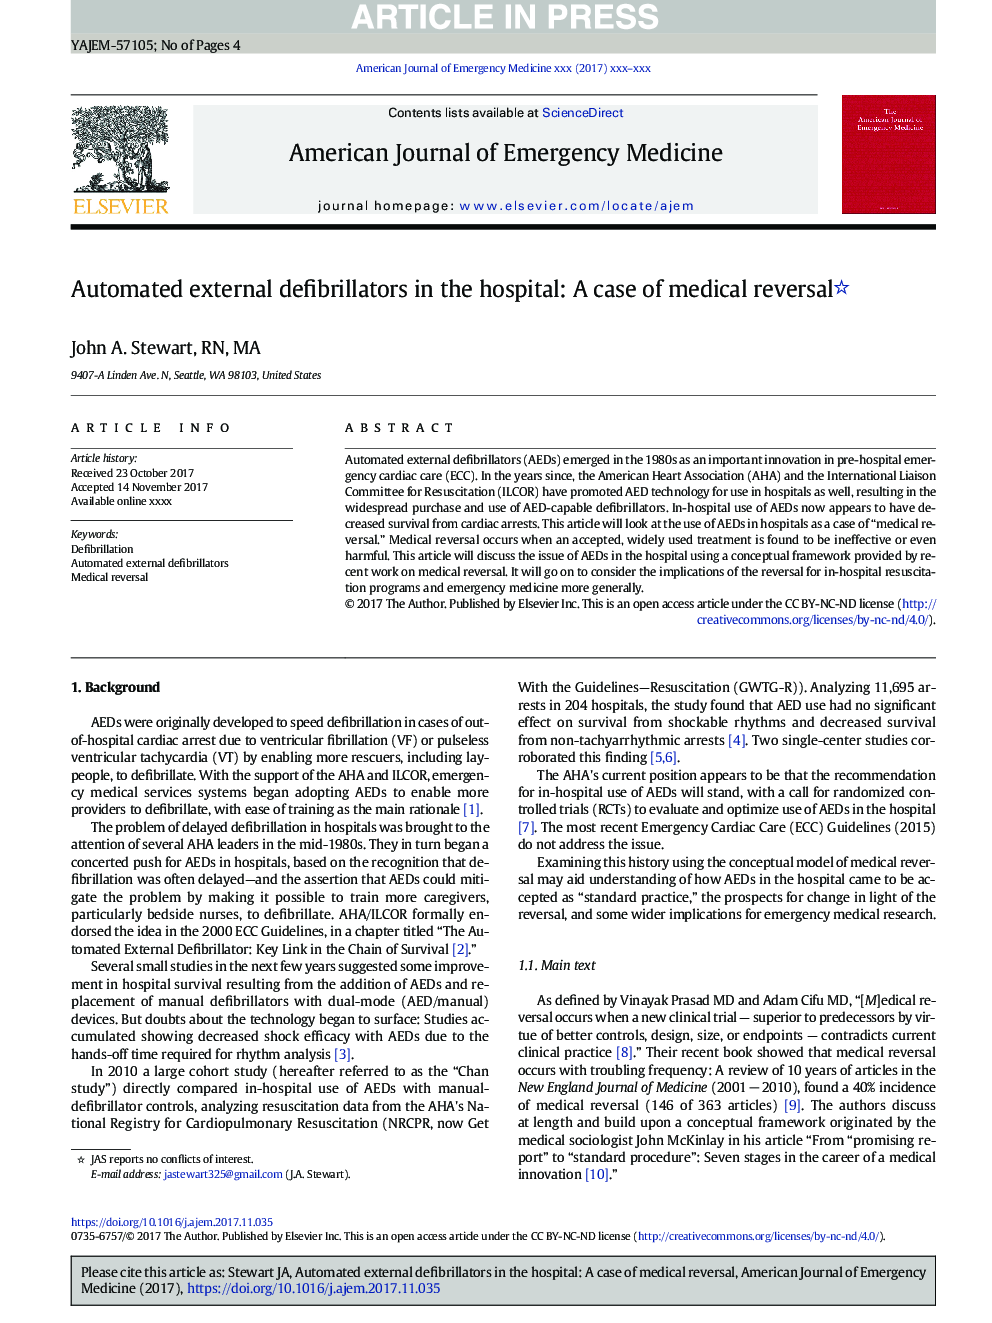 Automated external defibrillators in the hospital: A case of medical reversal